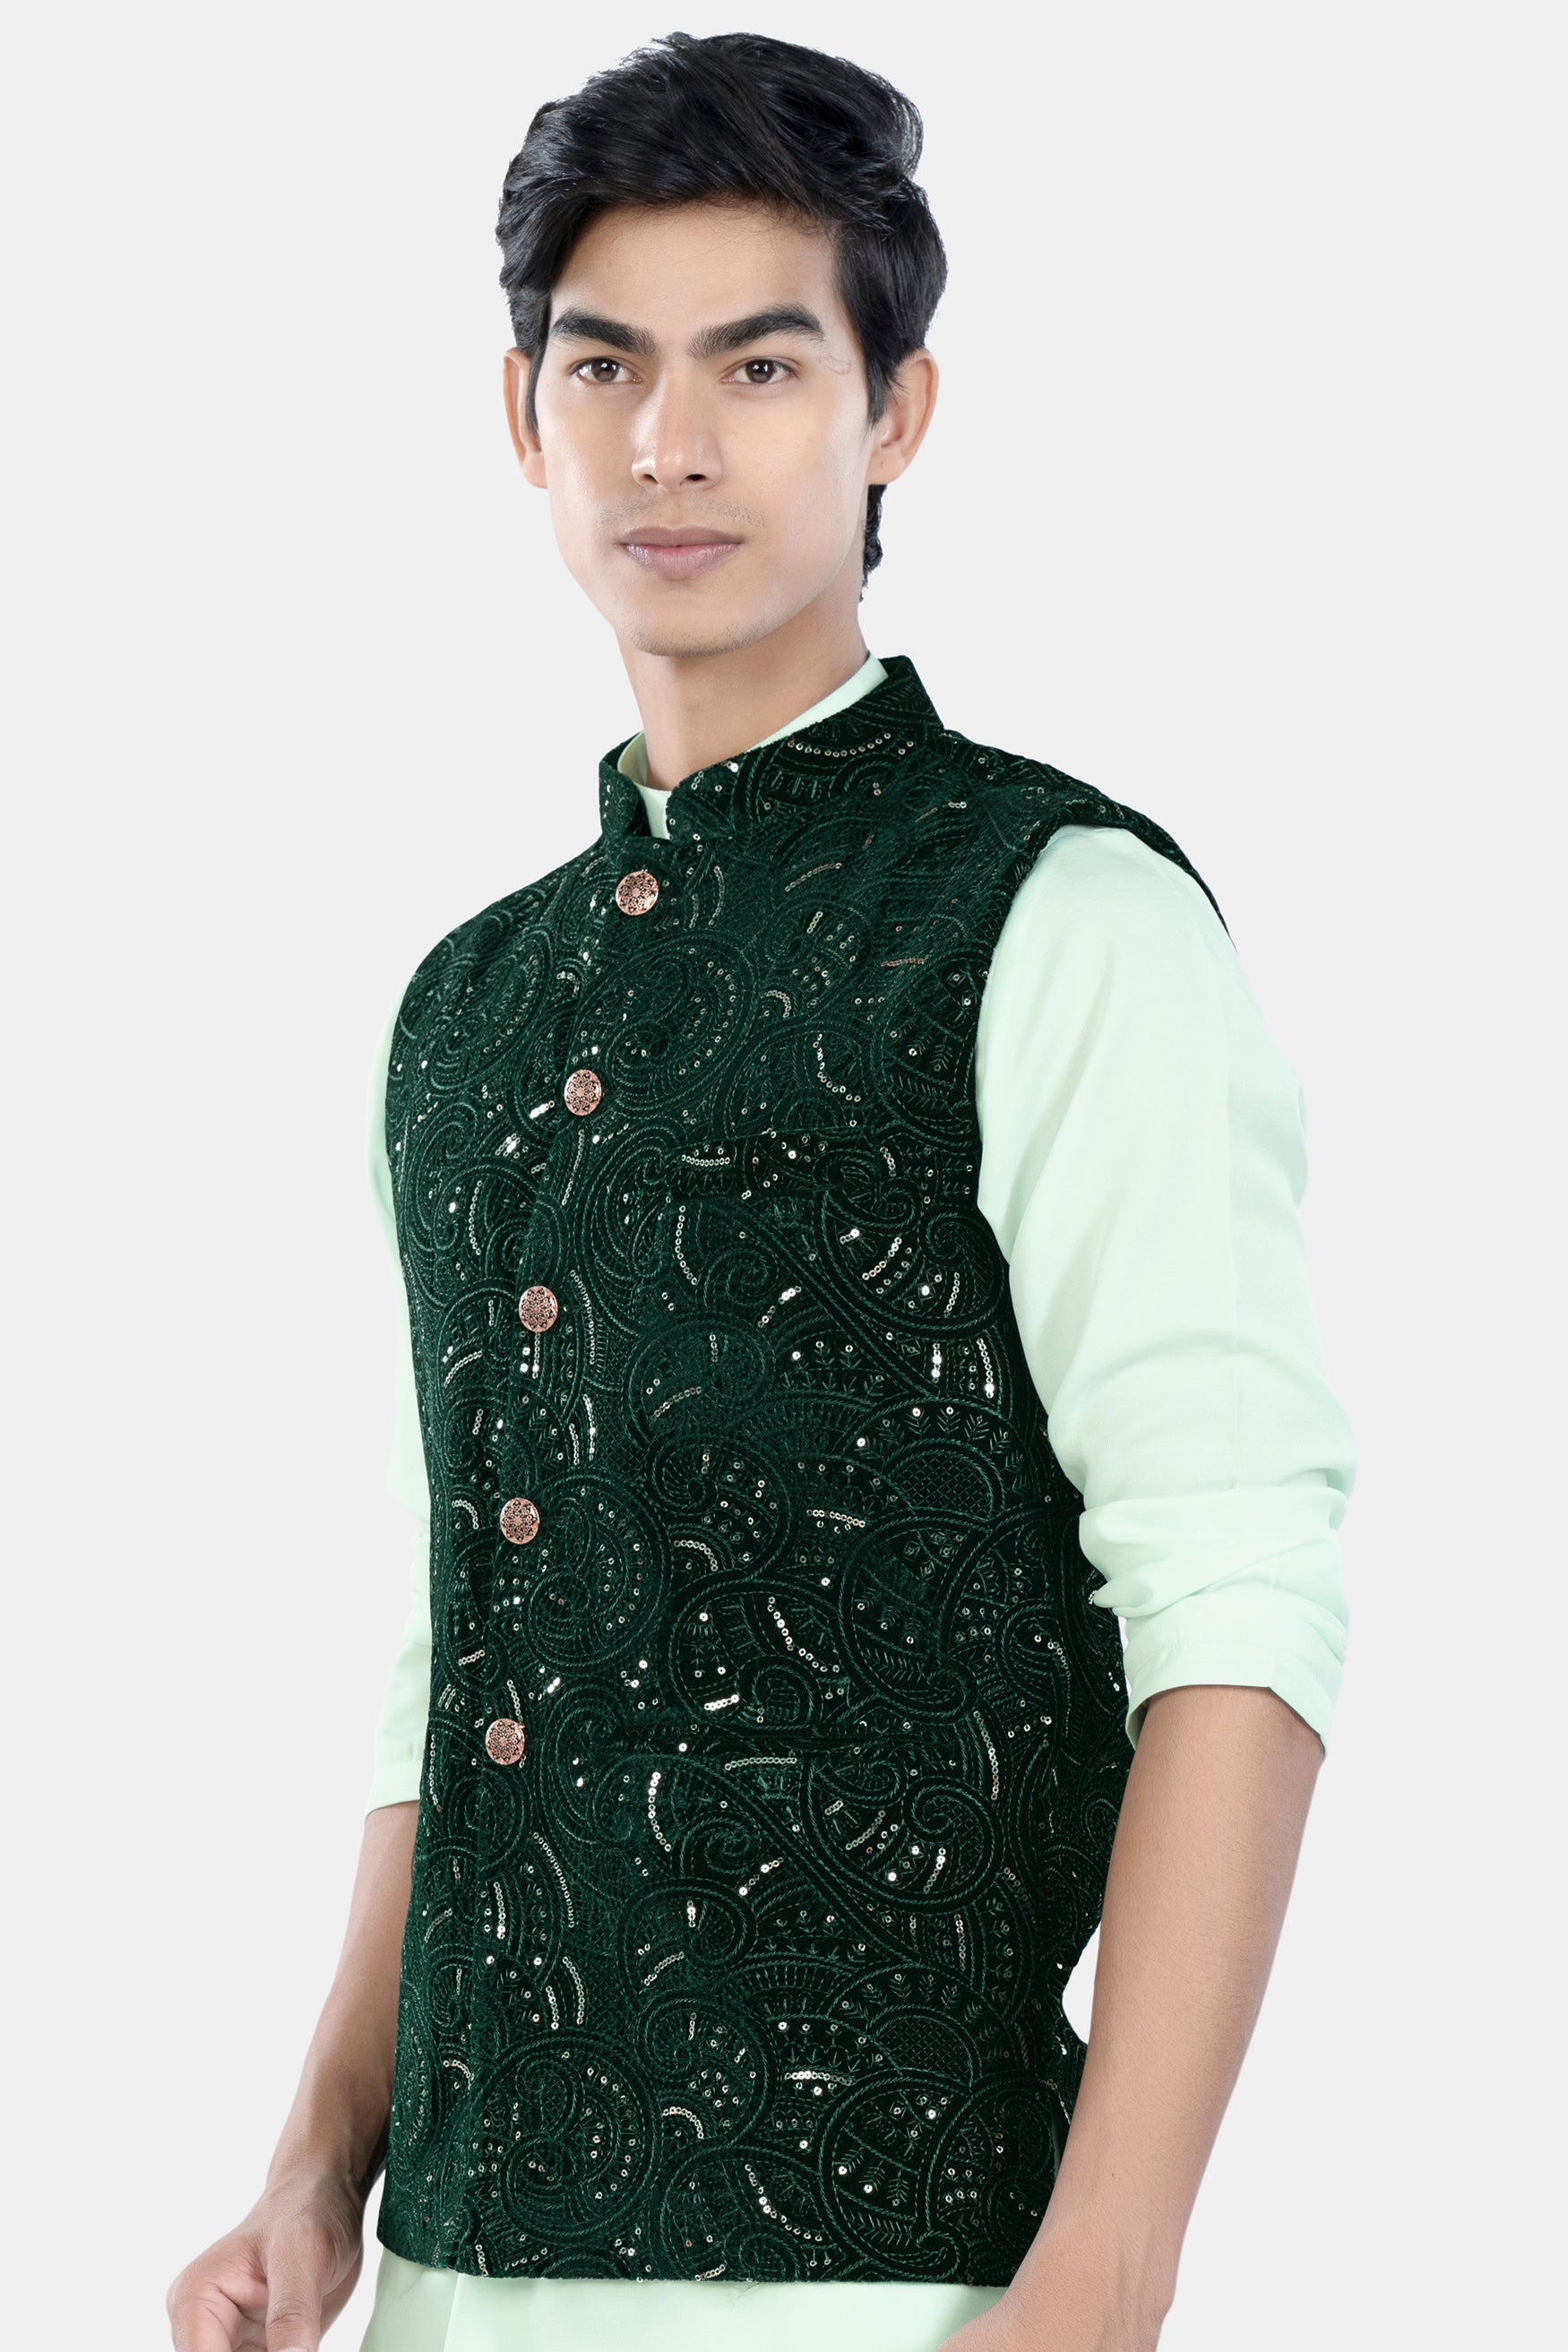 Palm and Jewel Green Sequin and Thread Embroidered Designer Nehru Jacket WC3457-36,  WC3457-38,  WC3457-40,  WC3457-42,  WC3457-44,  WC3457-46,  WC3457-48,  WC3457-50,  WC3457-52,  WC3457-54,  WC3457-56,  WC3457-58,  WC3457-60